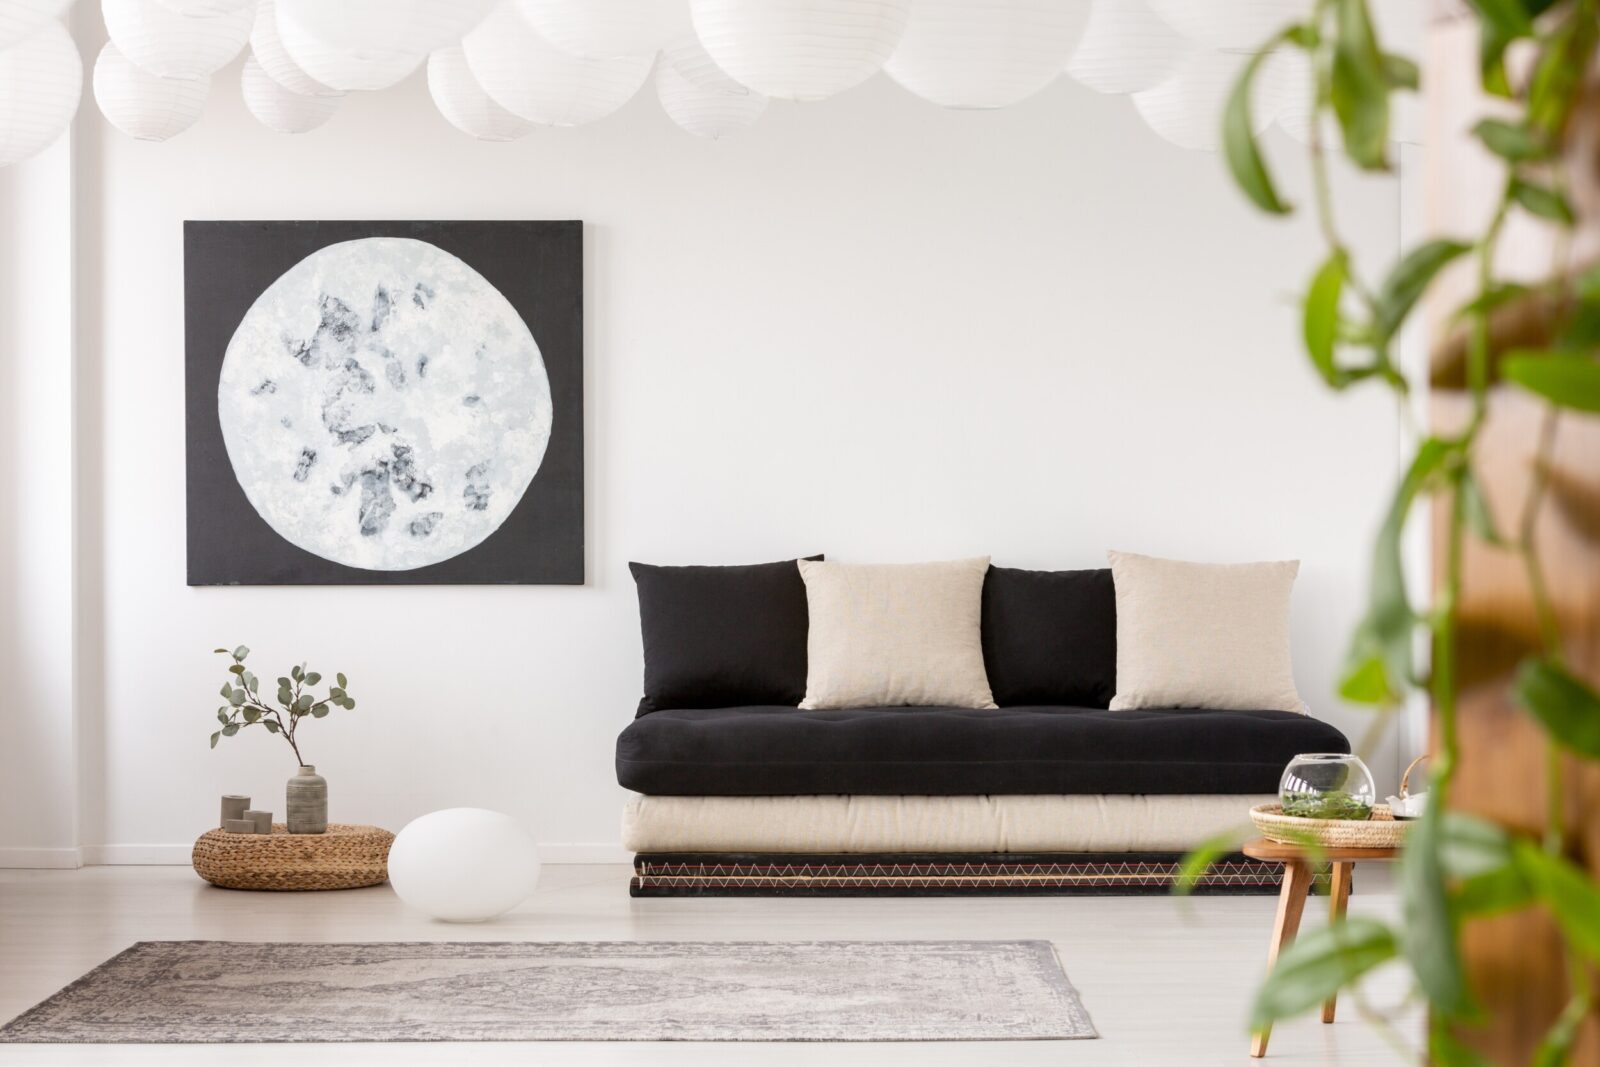 Pillows on black sofa in white living room interior with moon poster and grey carpet